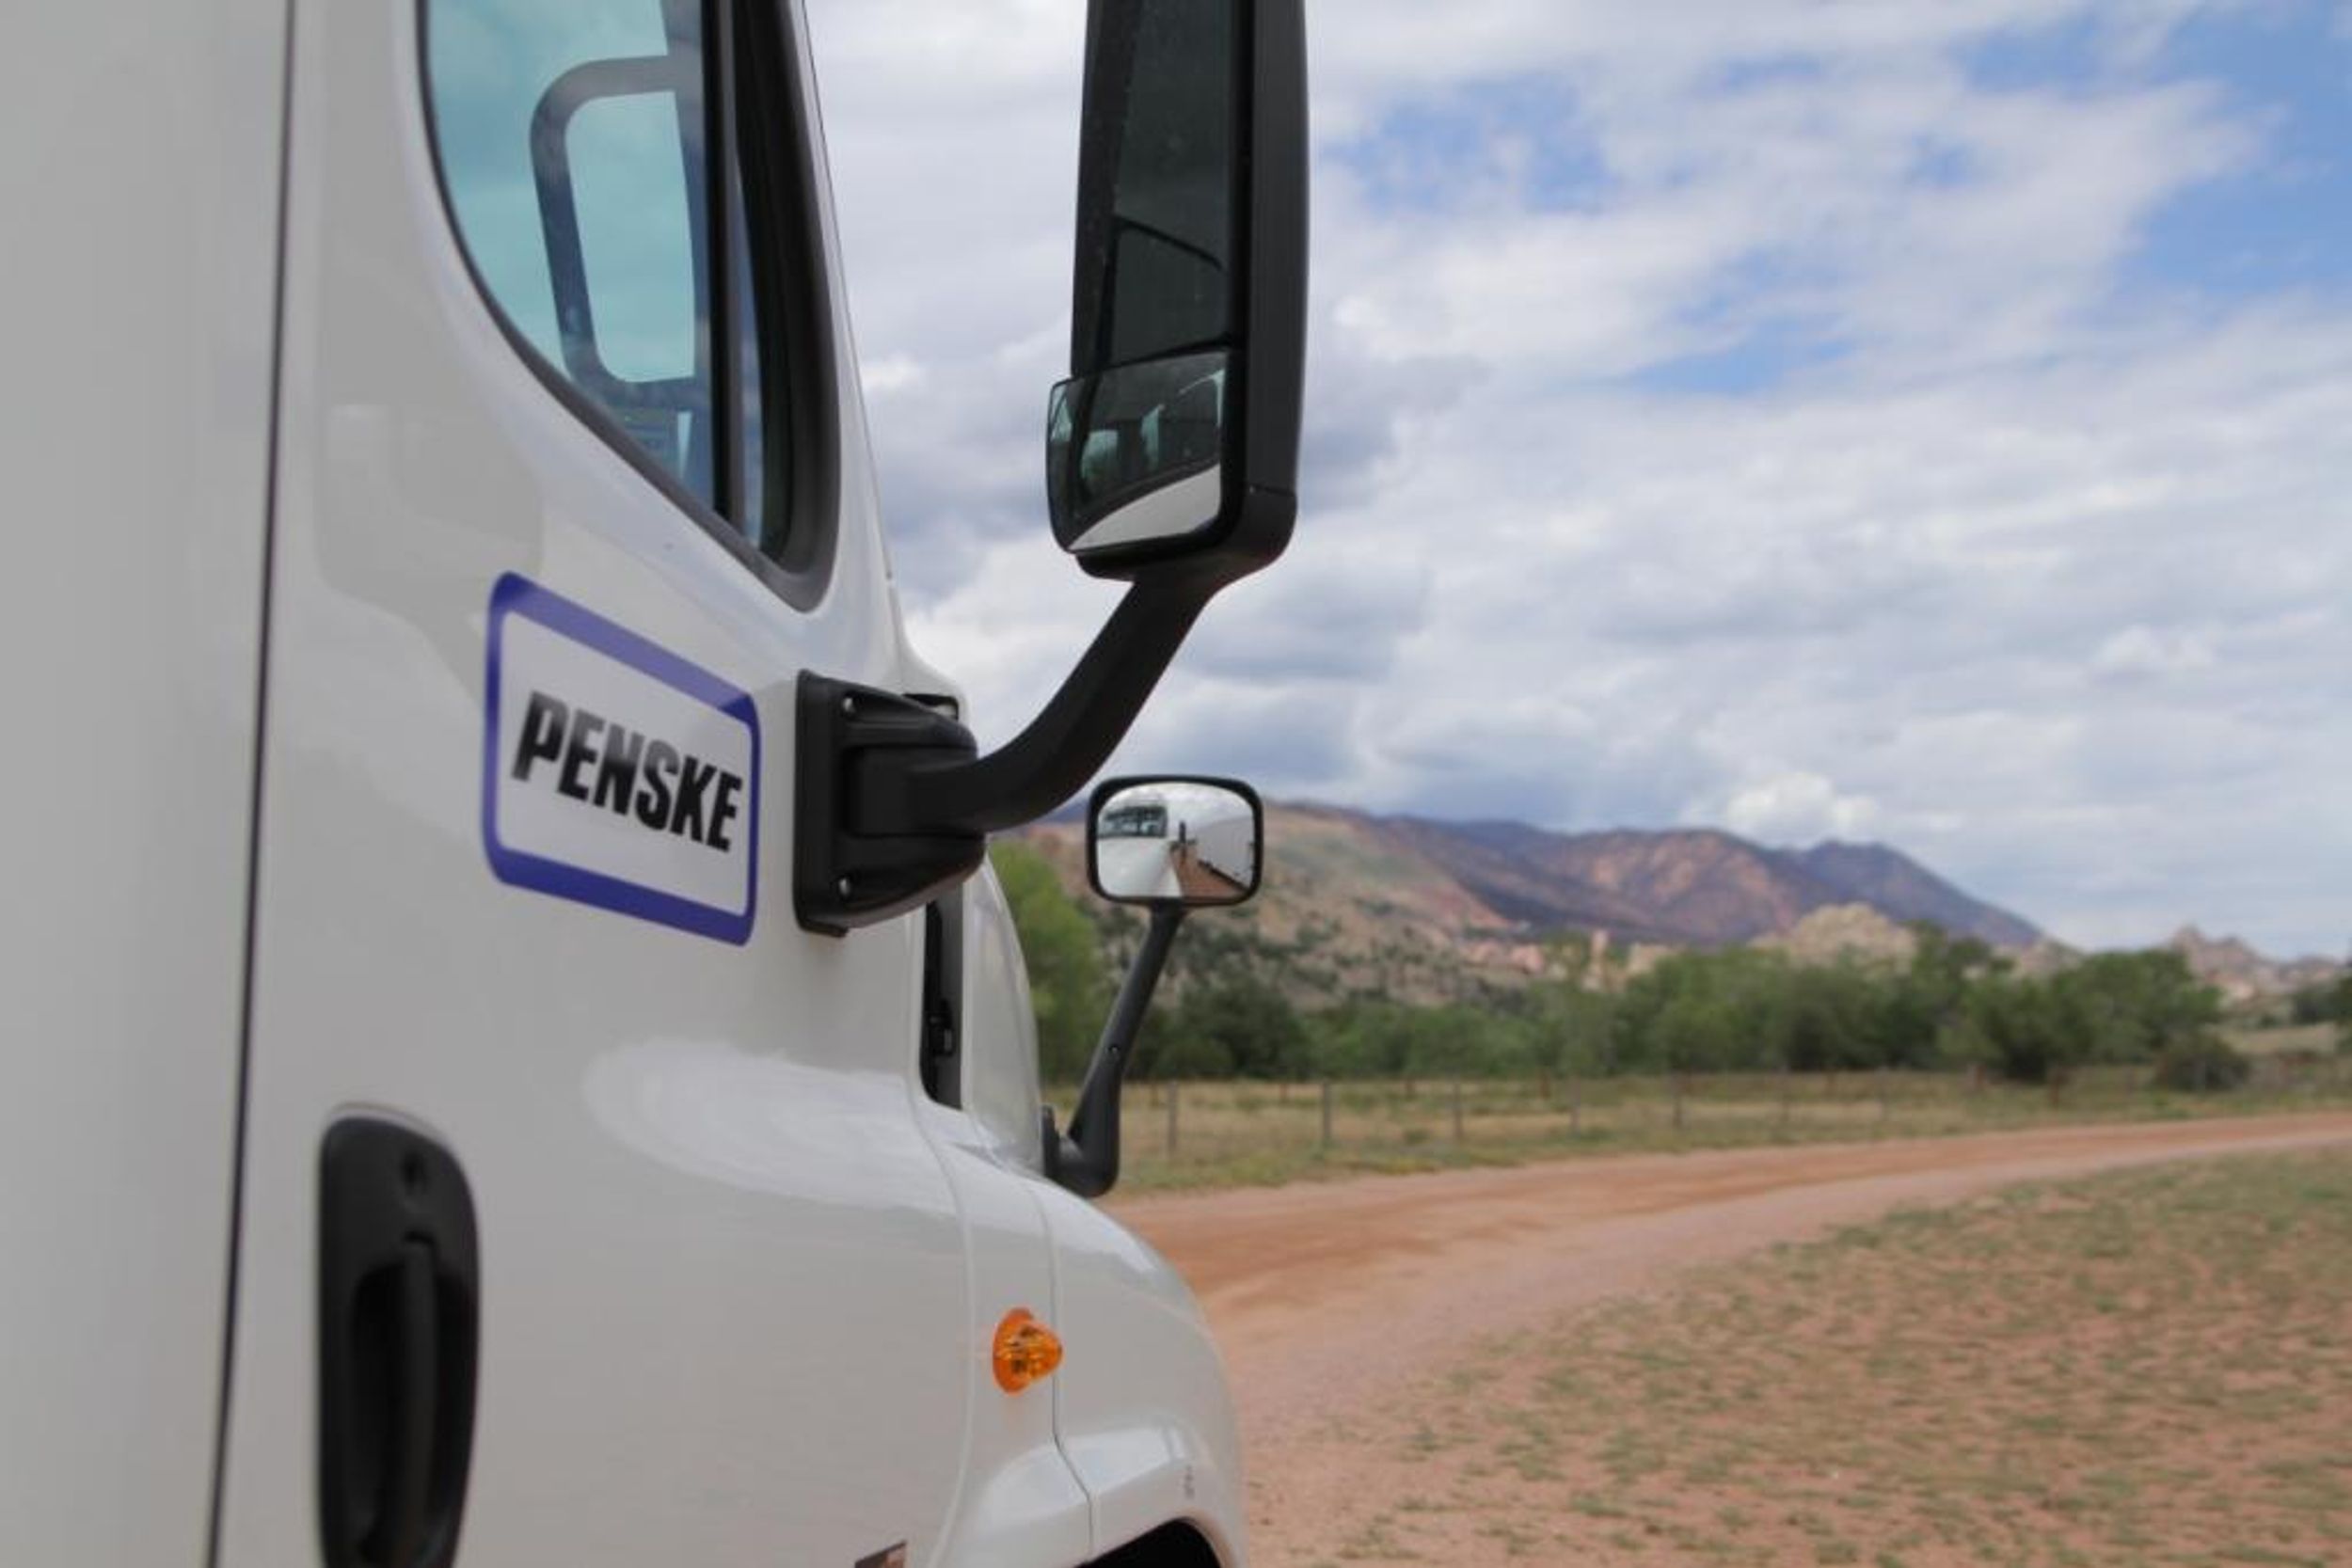 Penske Drivers Make Safety a Priority